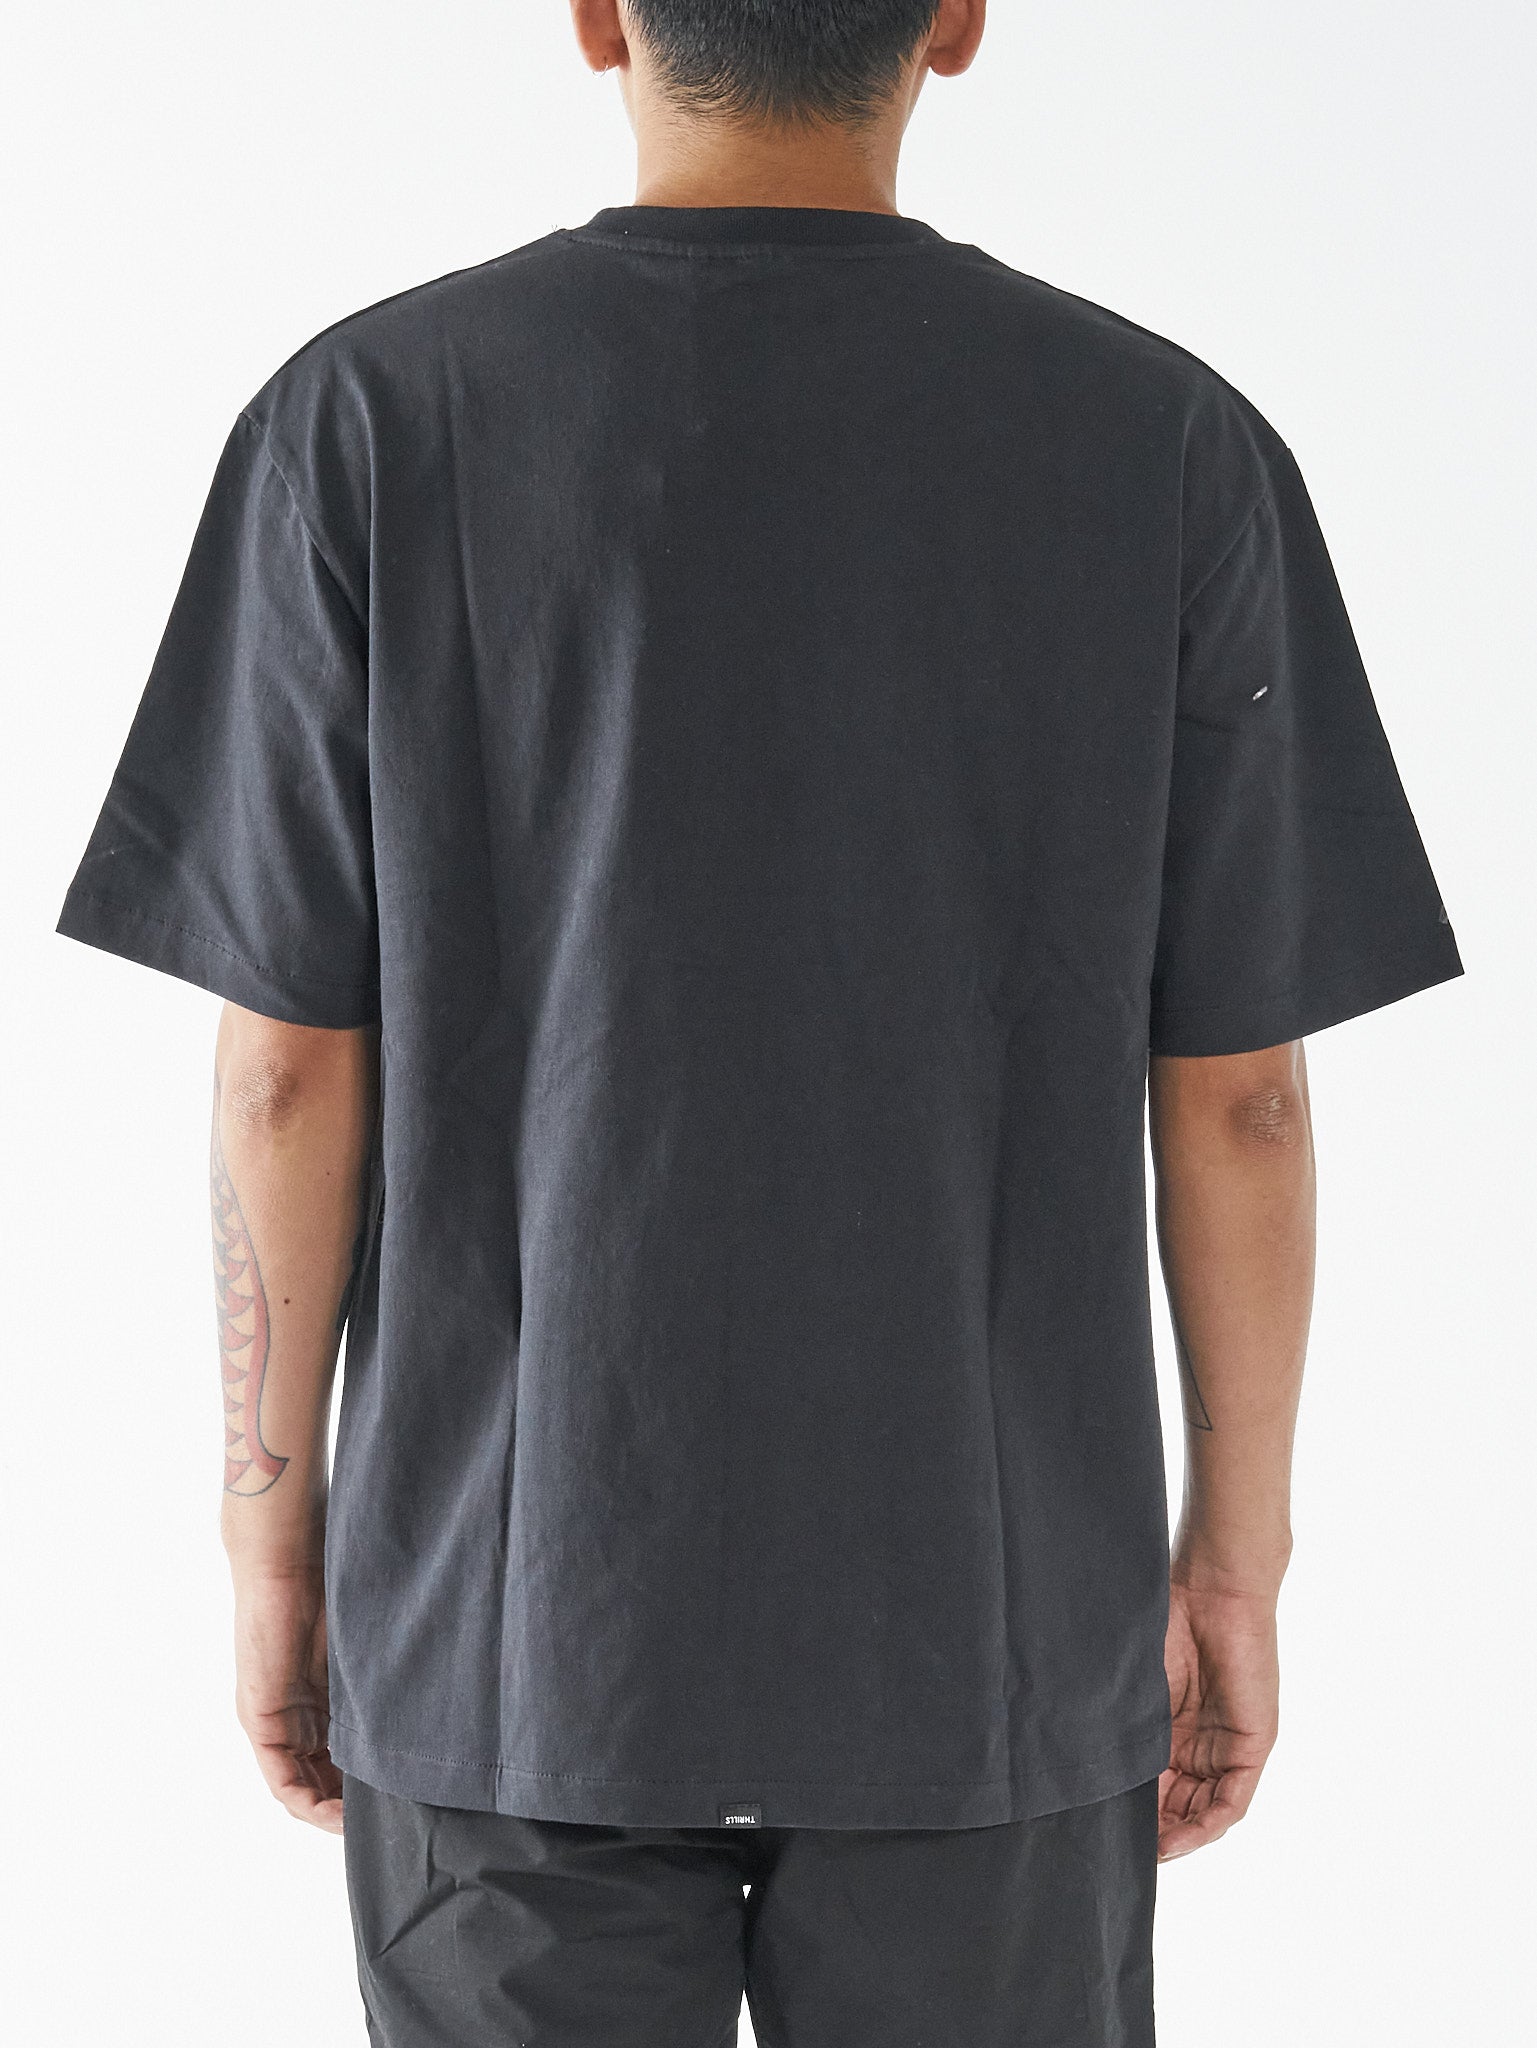 Syndicate Oversize Fit Tee - Black